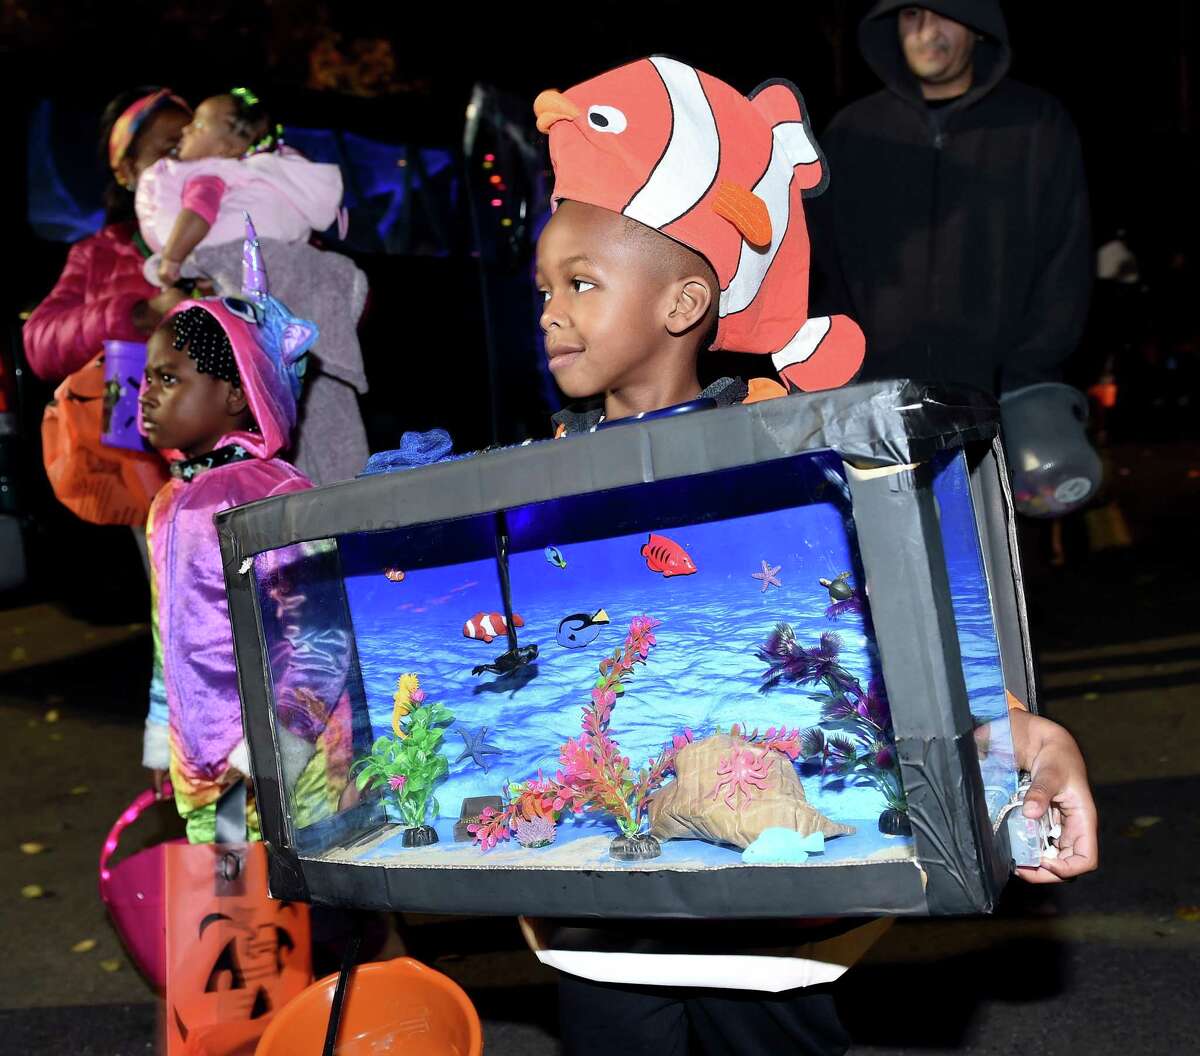 T.J. Relaford, 5, of Hamden, dressed as an aquarium gathers candy at the Halloween Trunk or Treat event at Edgewood Park in New Haven on Wednesday.